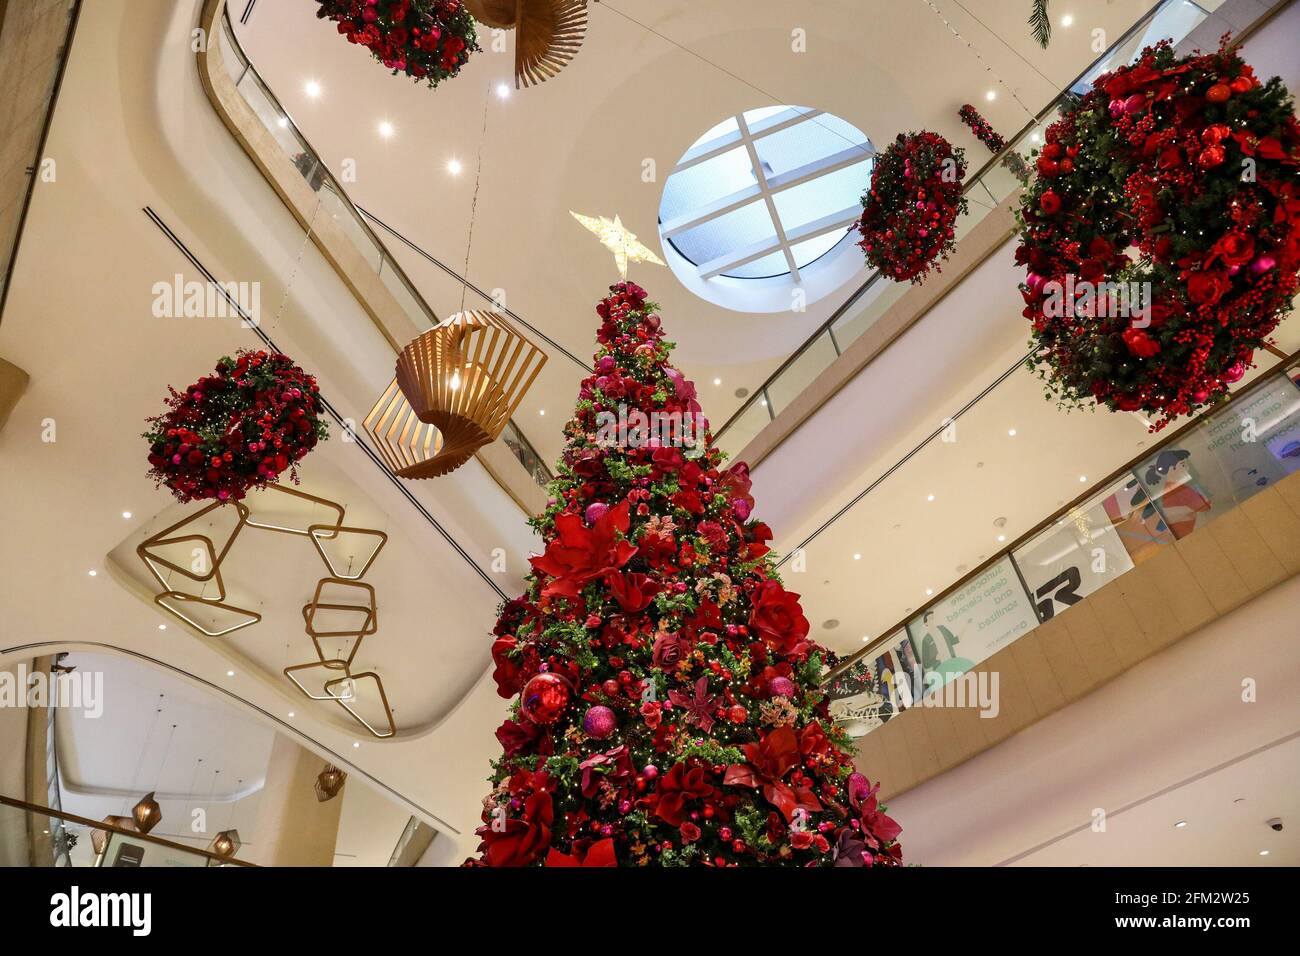 Christmas decorations are seen inside a shopping mall during a ...